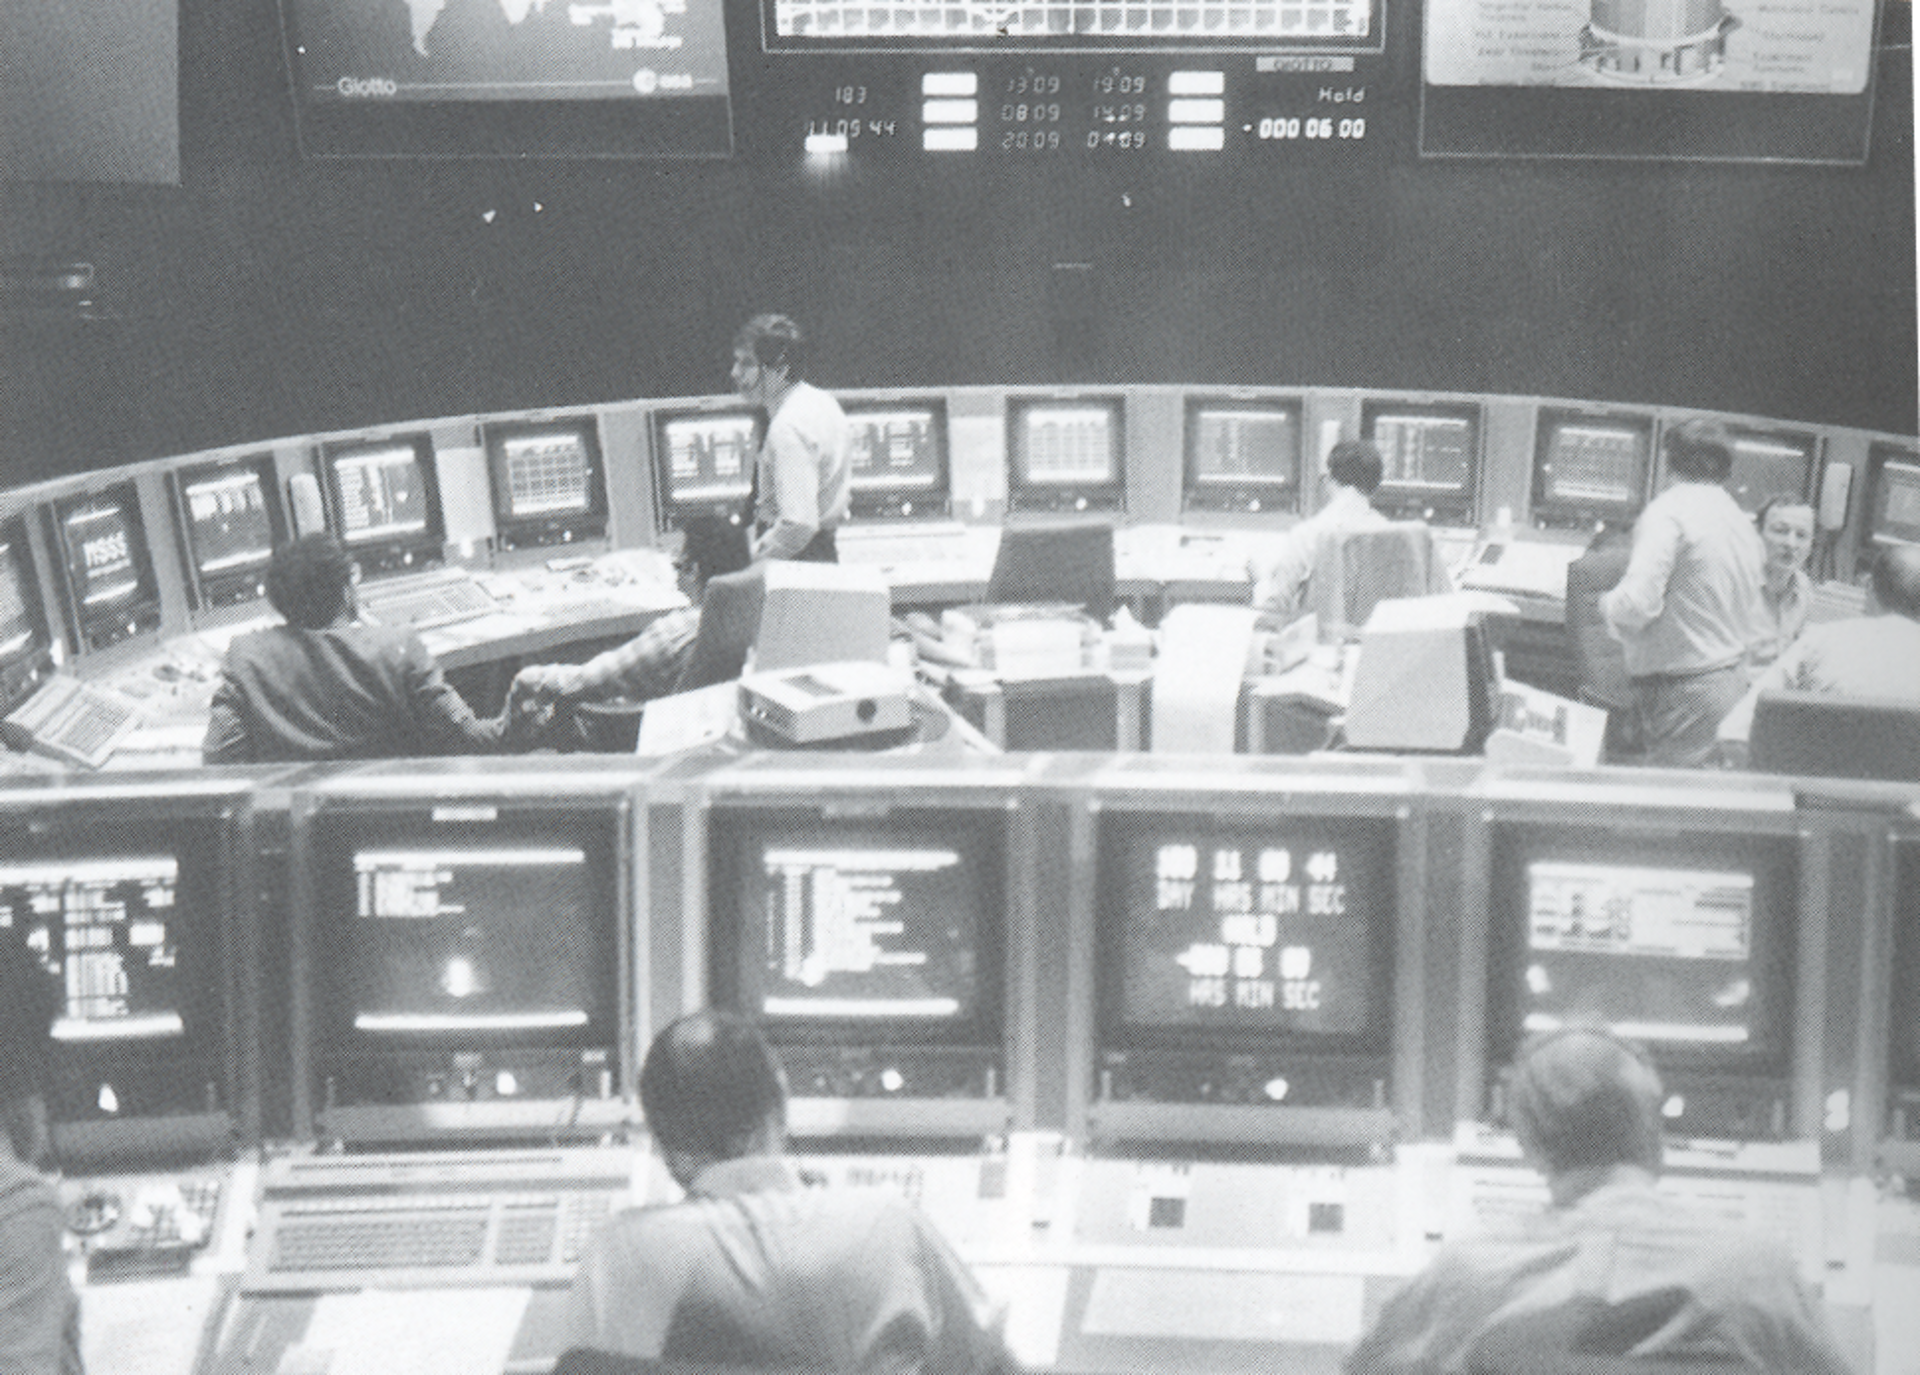 ESOC Main Control Room in the 1980s